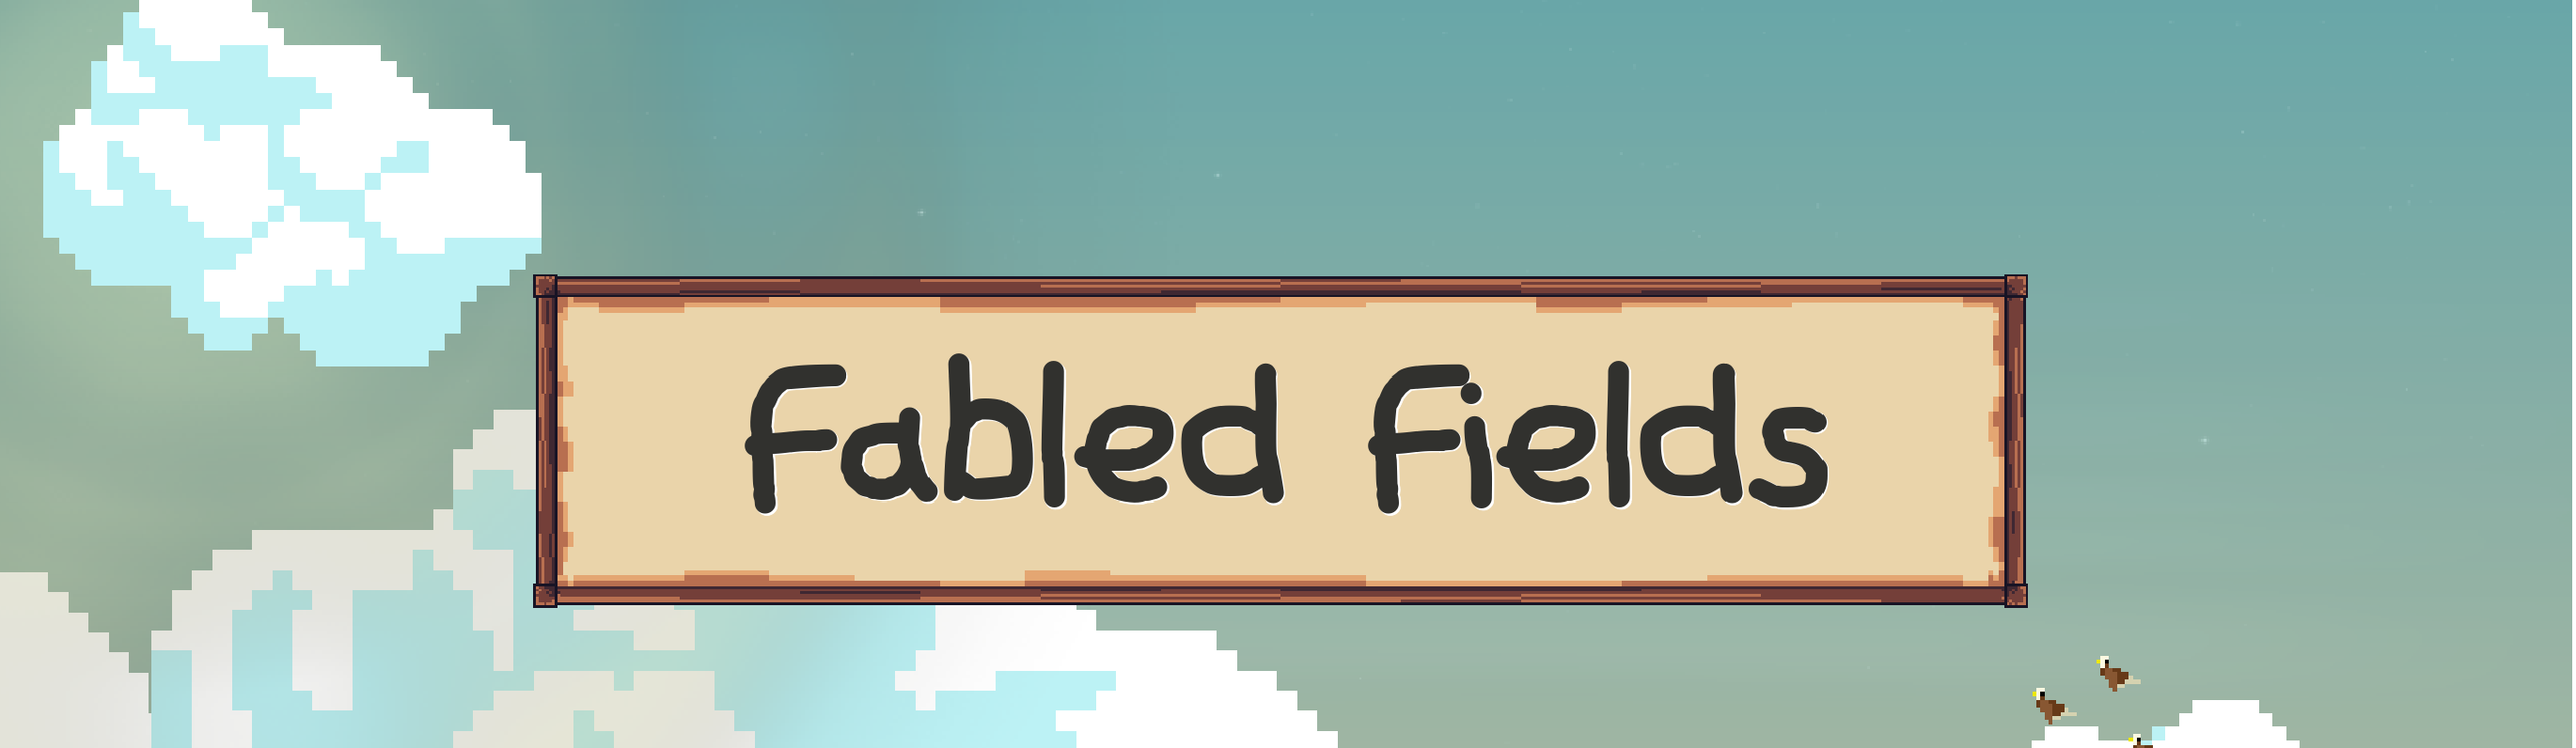 Fabled Fields